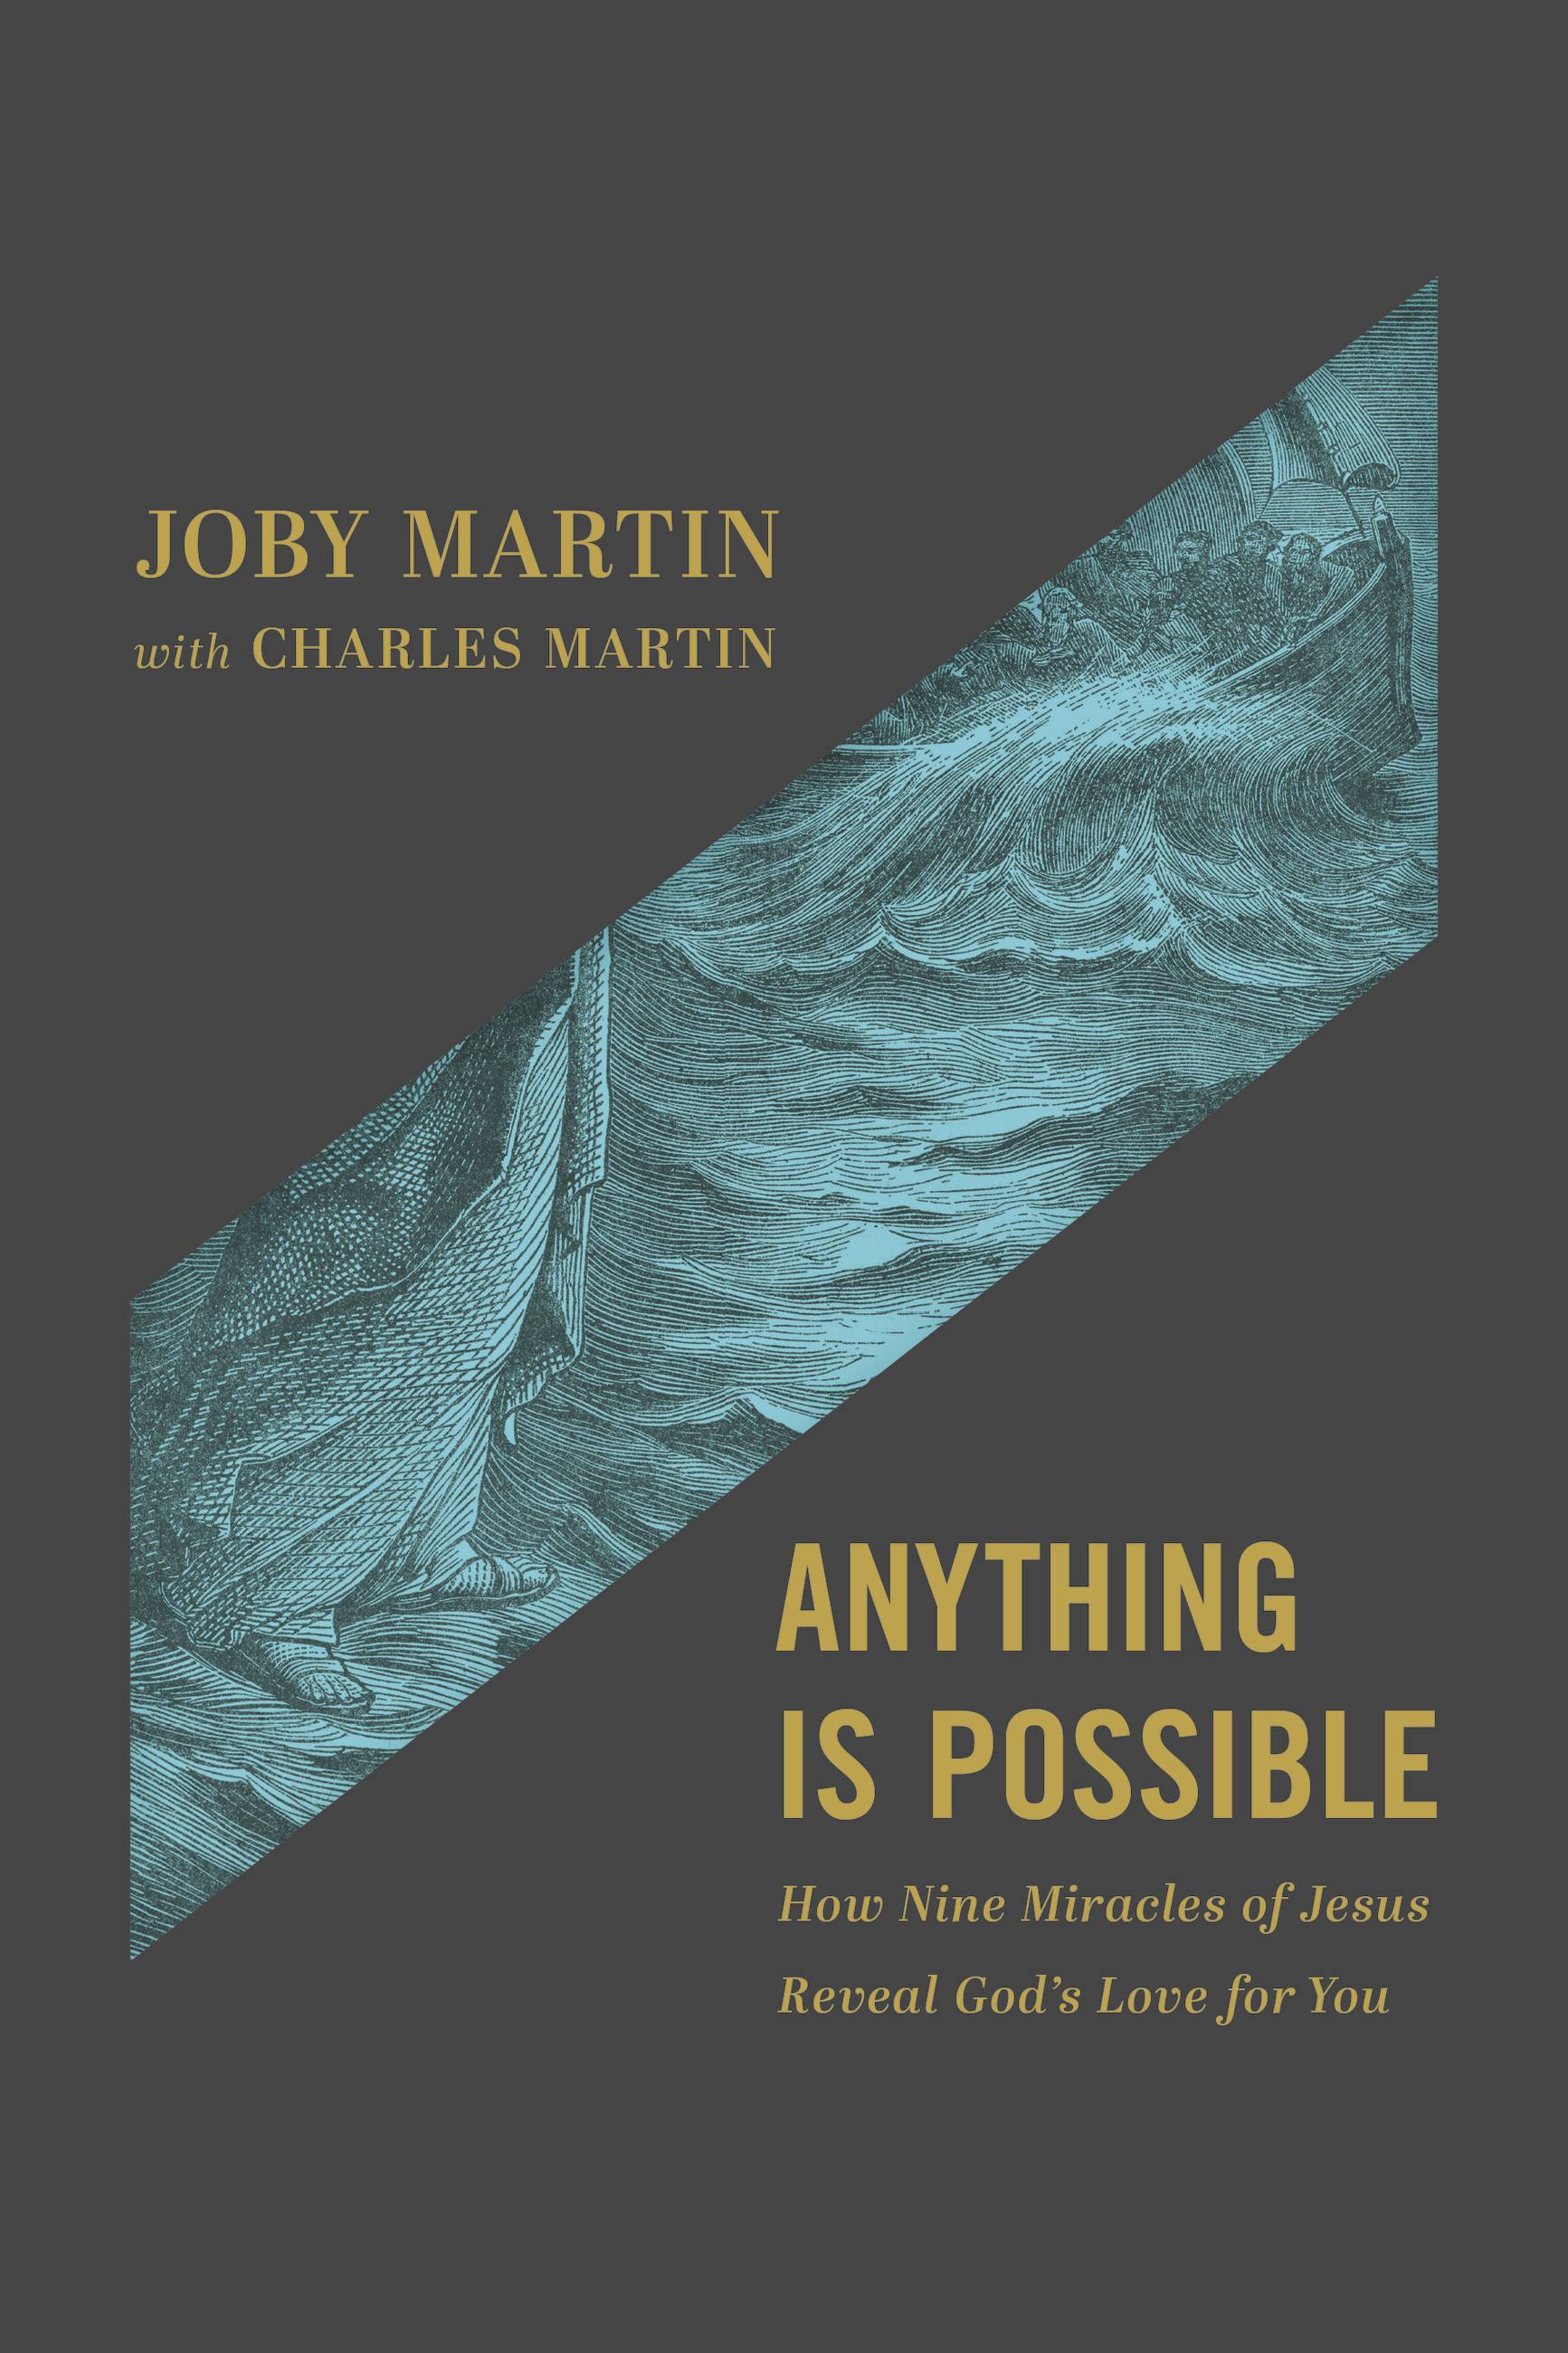 Anything Is Possible by Joby Martin Hachette Book Group